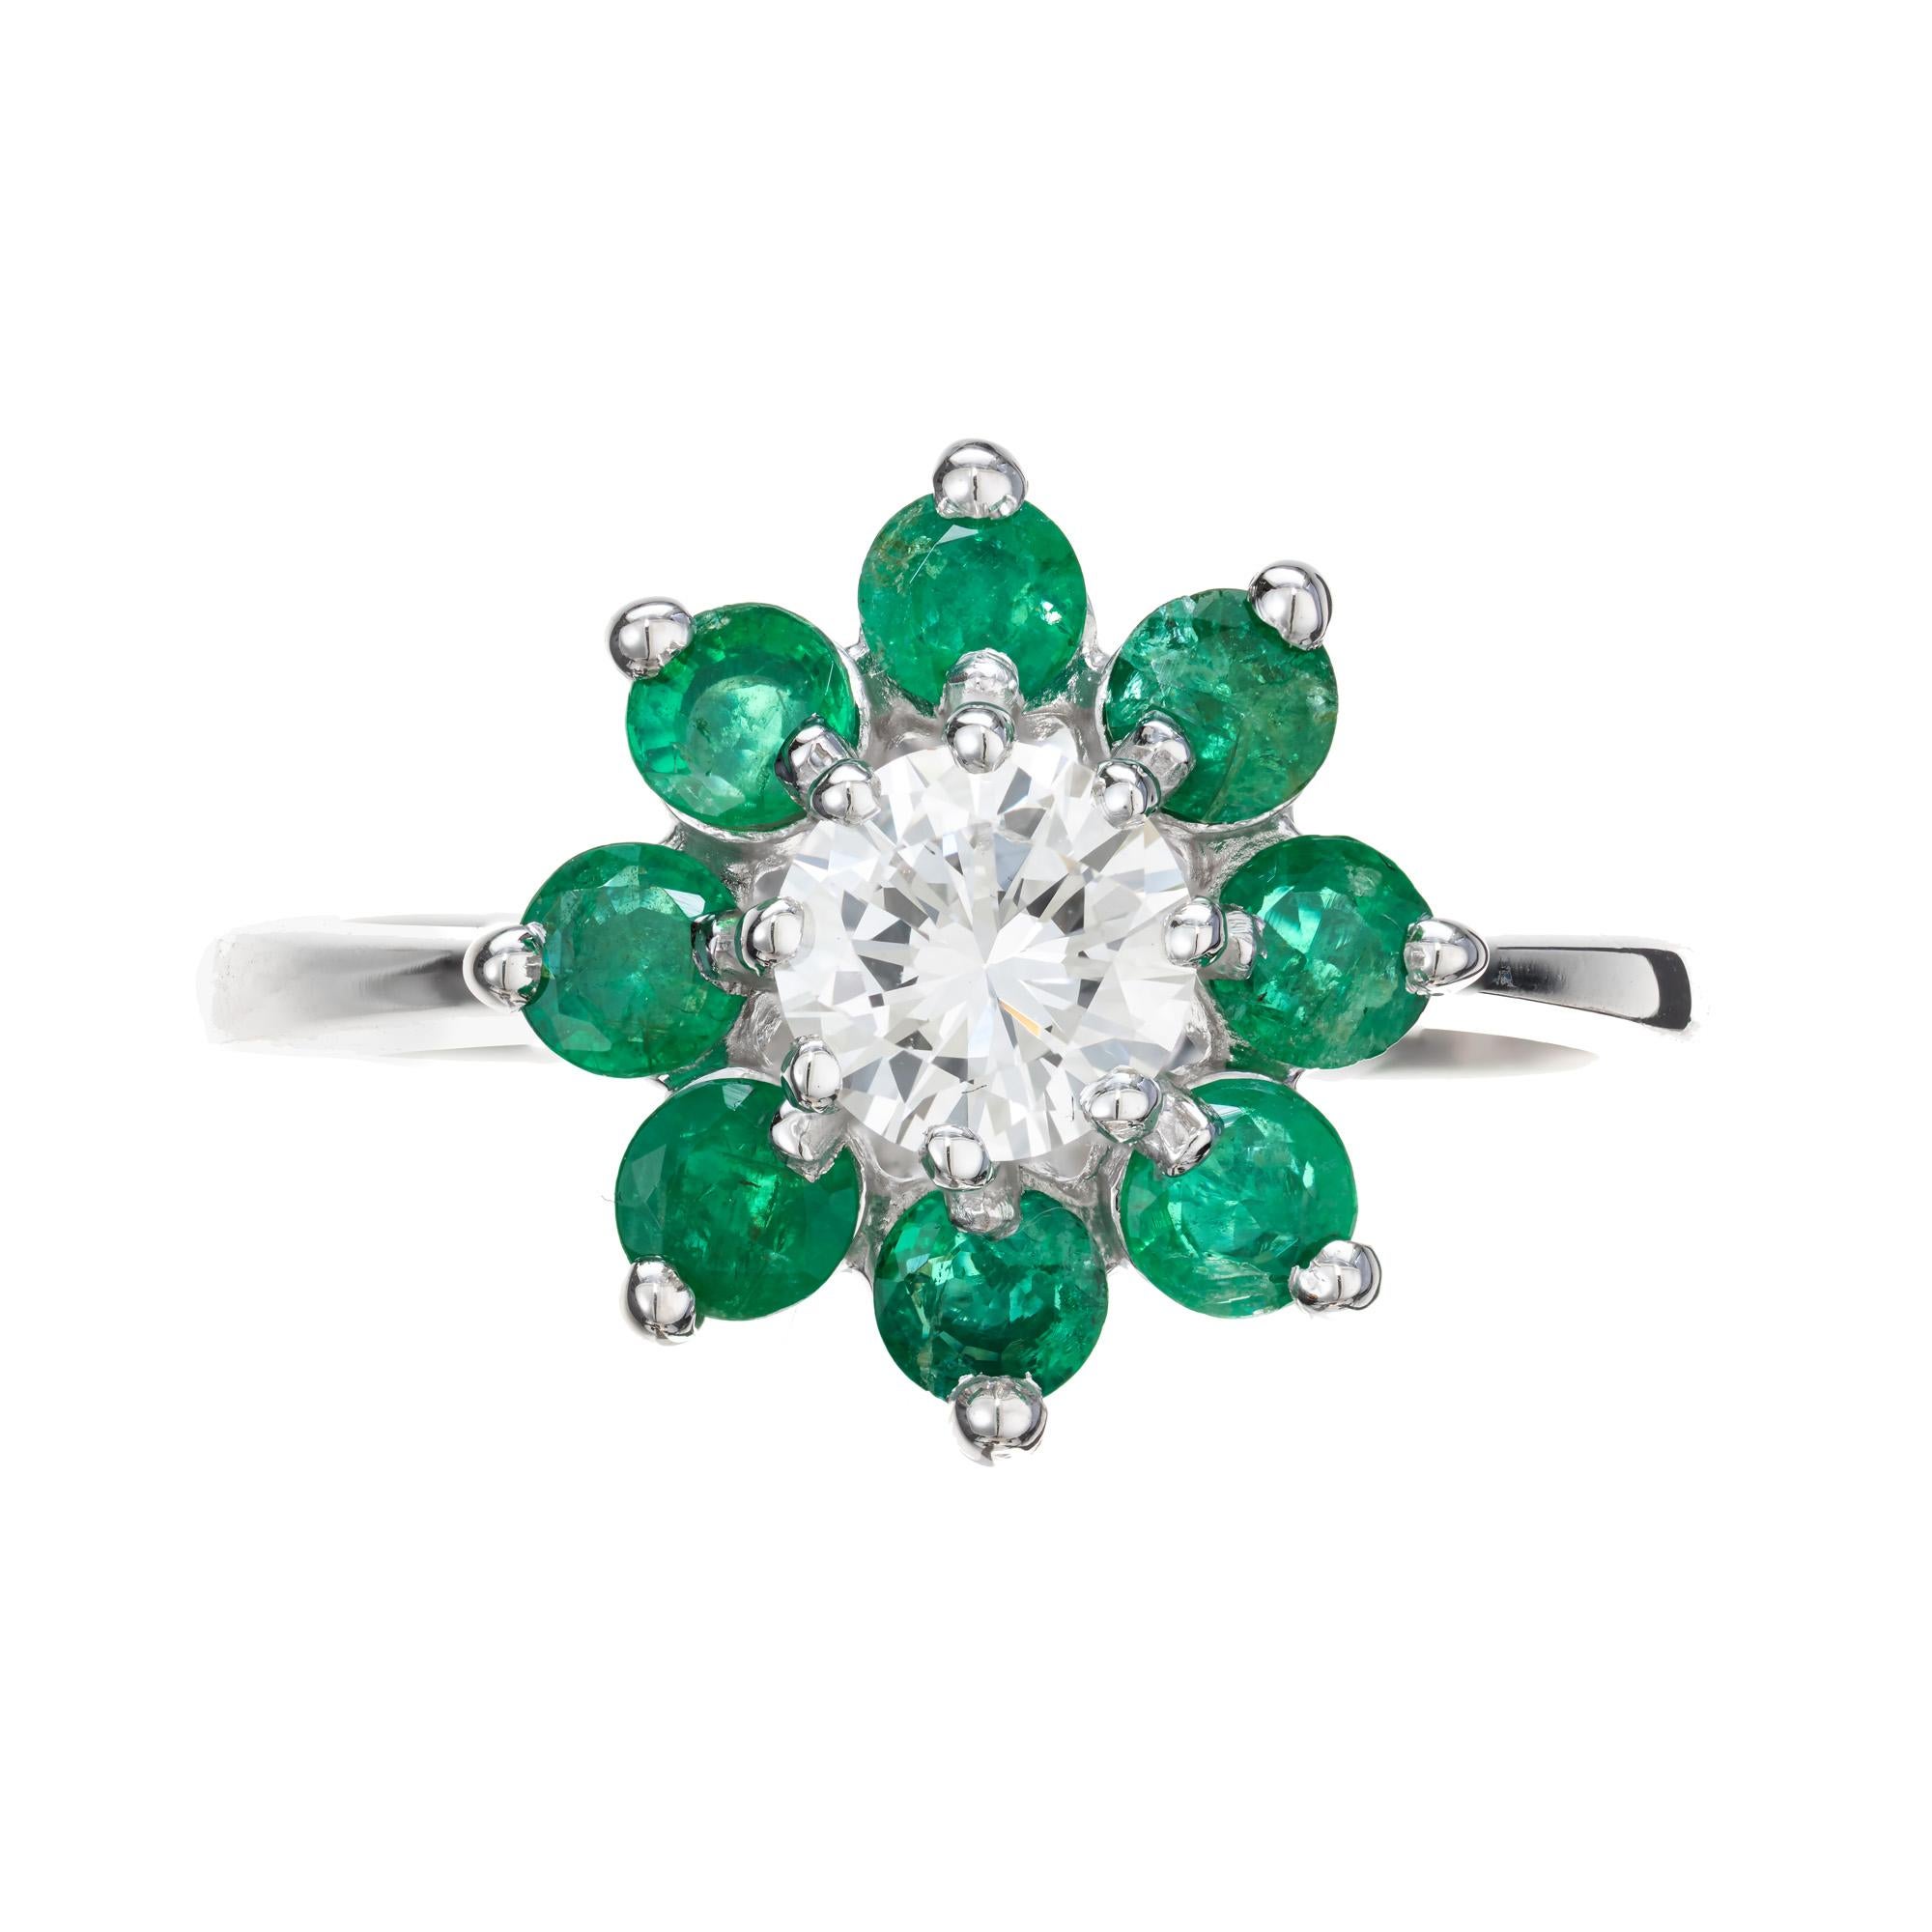 Mid-Century 1960's diamond and emerald engagement ring. .50ct round brilliant cut center diamond with a halo of 8 round green emeralds in a 14k white gold setting. 

Follow us on our 1stdibs storefront to view our weekly new additions and 5 Star